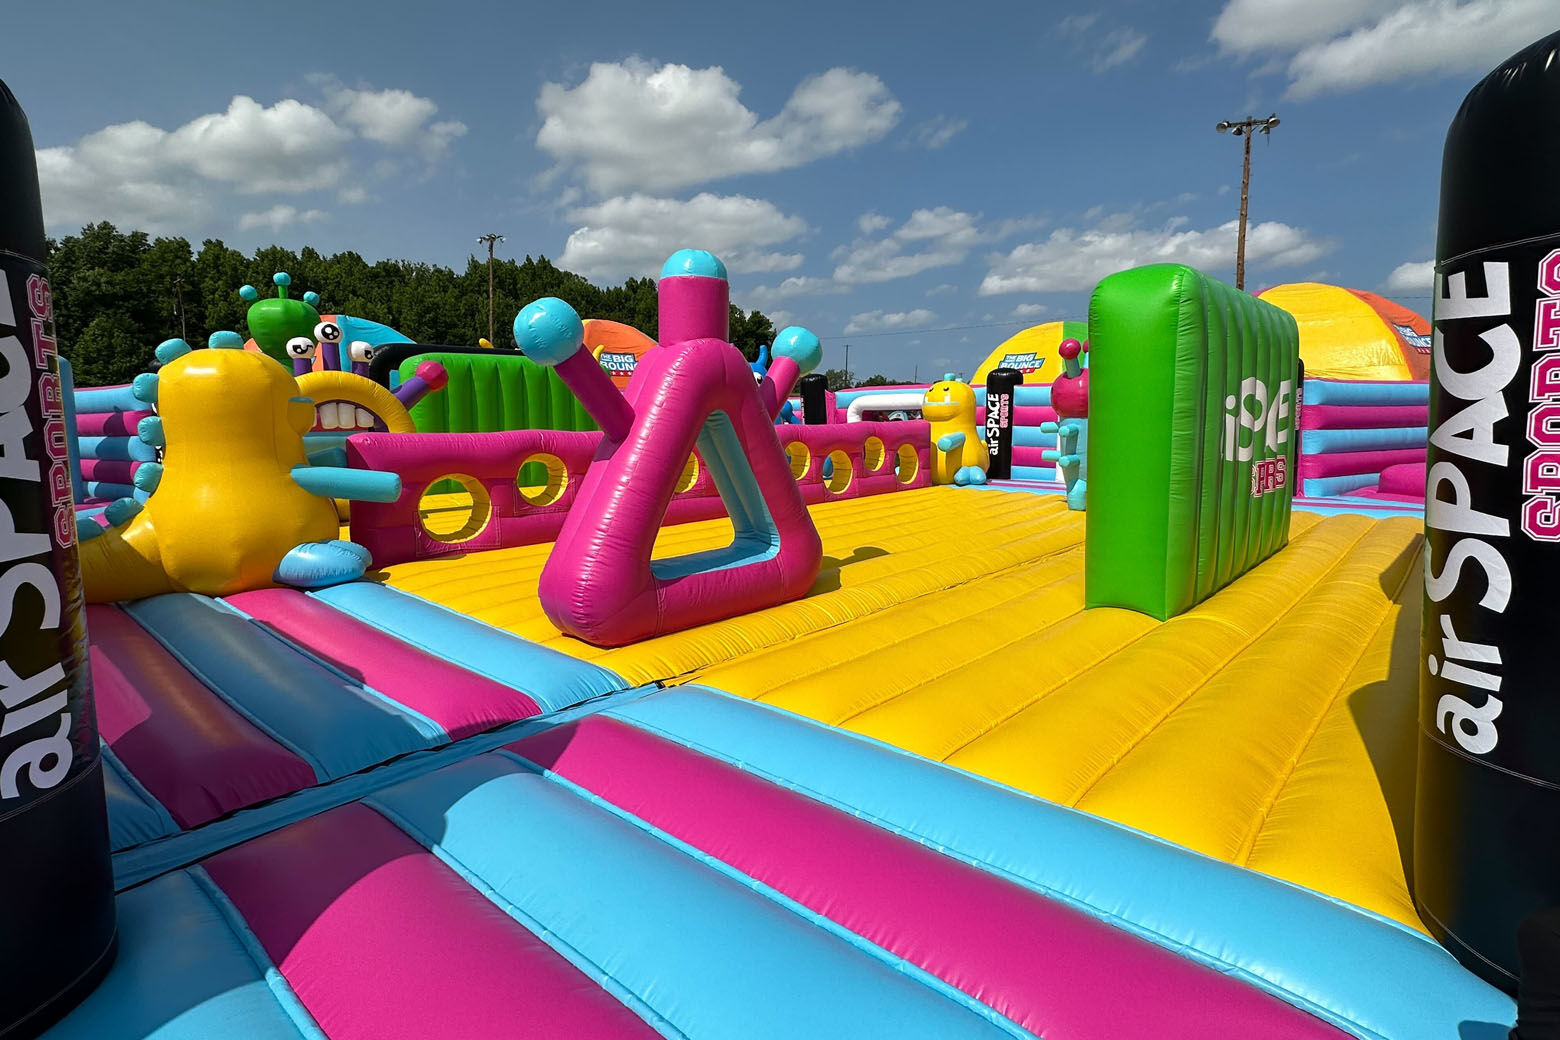 <p>&#8220;Everybody&#8217;s a kid once they get into this confinement here,&#8221; he added. &#8220;The Castle, The Giant, the ball pit, Airspace Sports … it just brings out the big kid in everybody. How could it not?!&#8221;</p>
